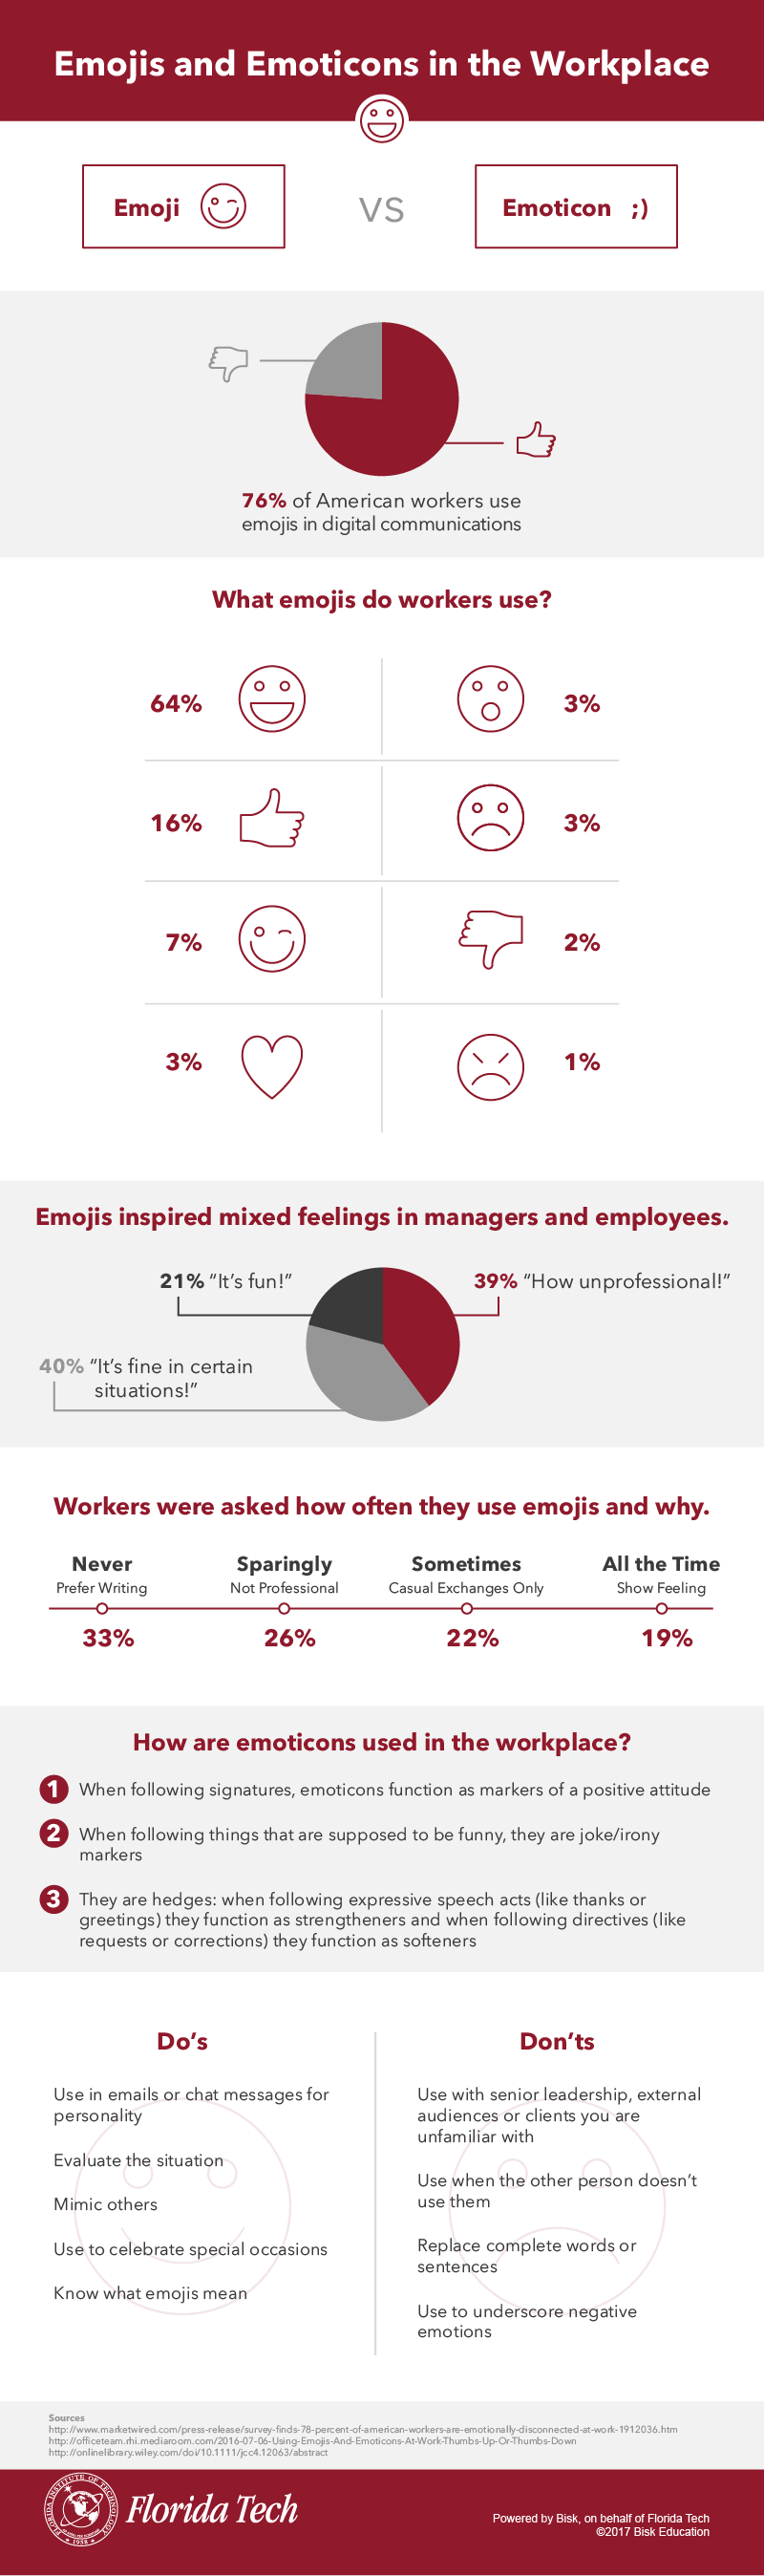 Emojis in the Workplace